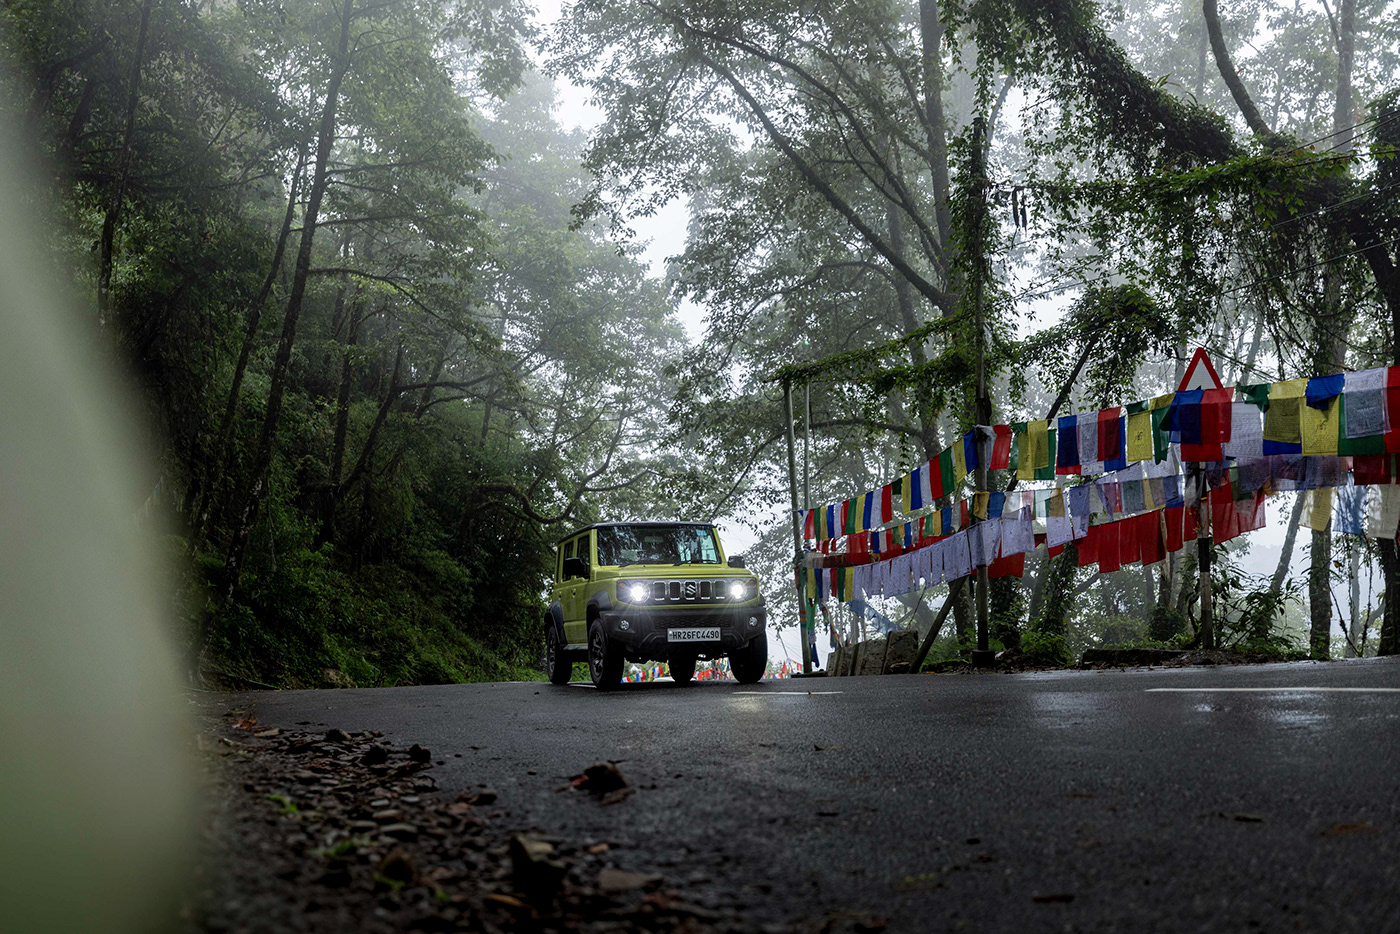 Maruti Suzuki jimny marketing   Brand Manager Indian navy expedition road trip Travel mountains forest